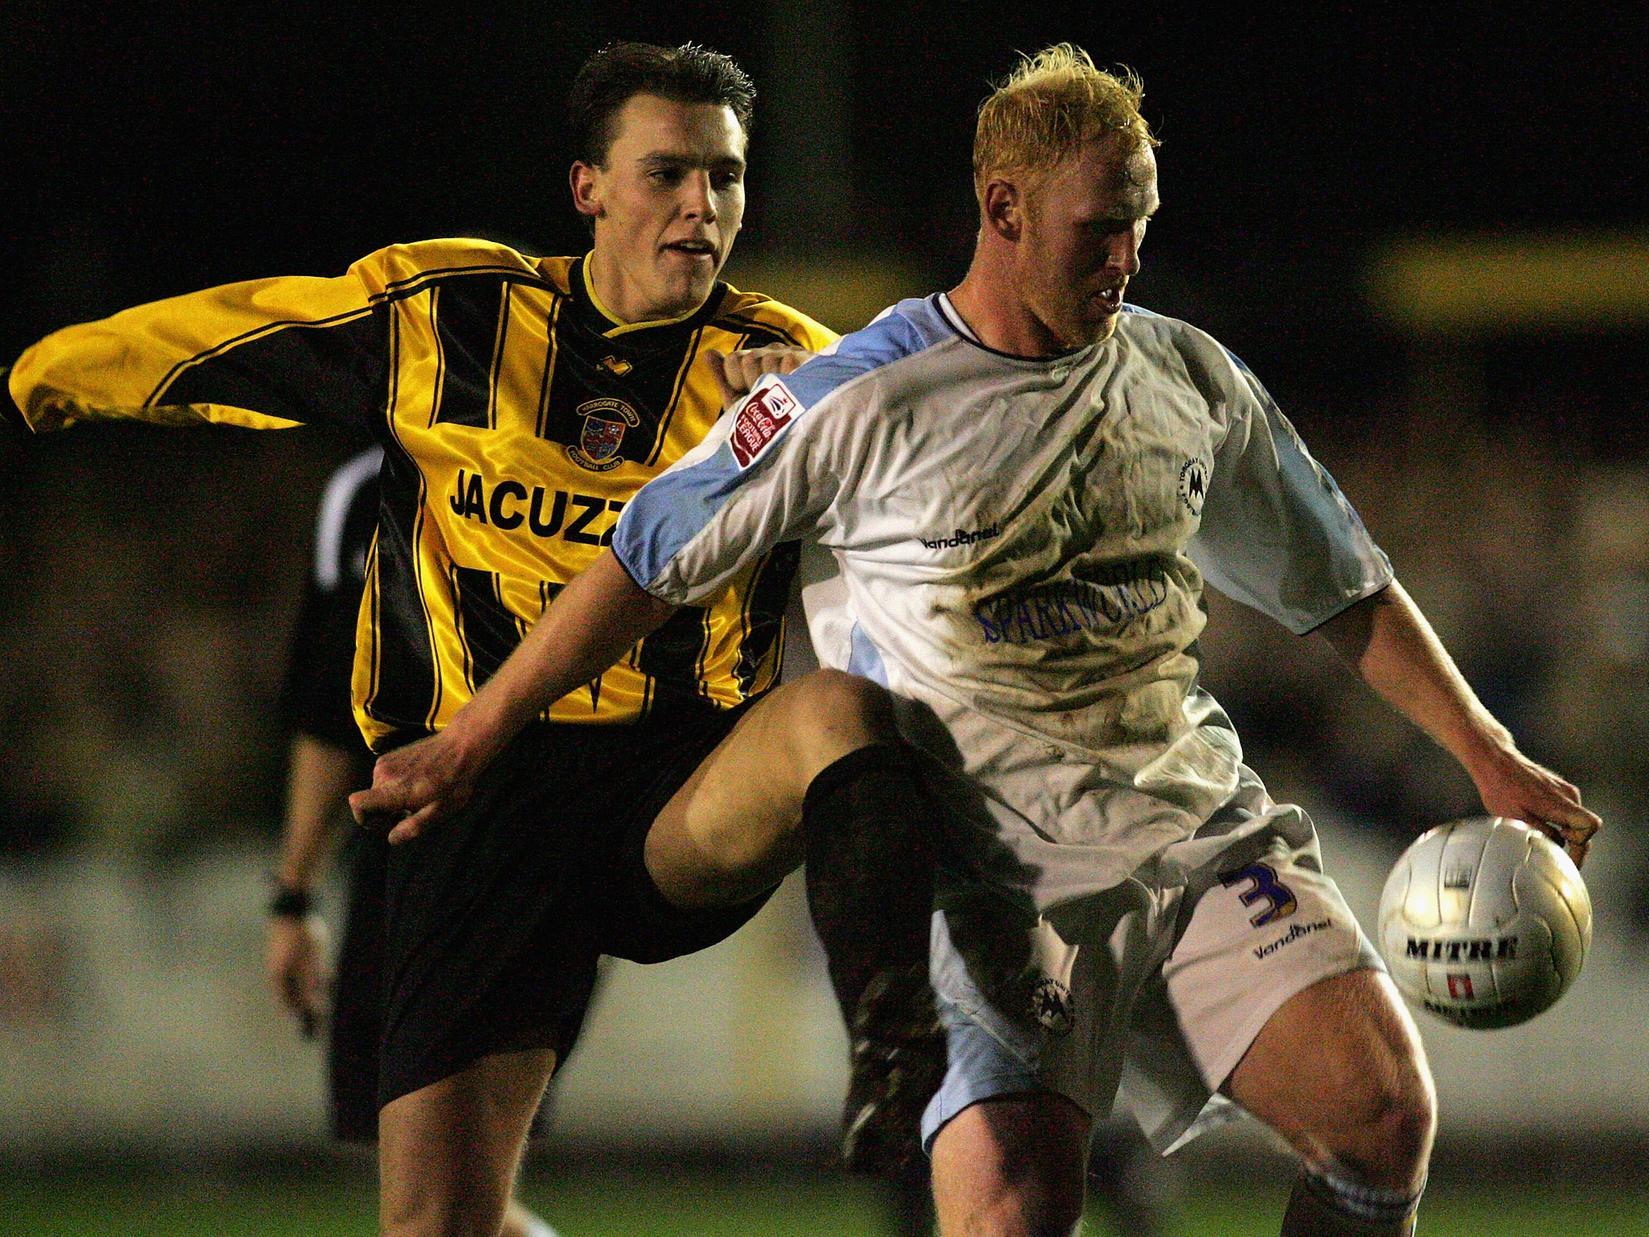 Harrogate Town's Danny Holland challenges James Sharp during the FA Cup first round replay clash with Torquay United at Wetherby Road on November 15, 2005.